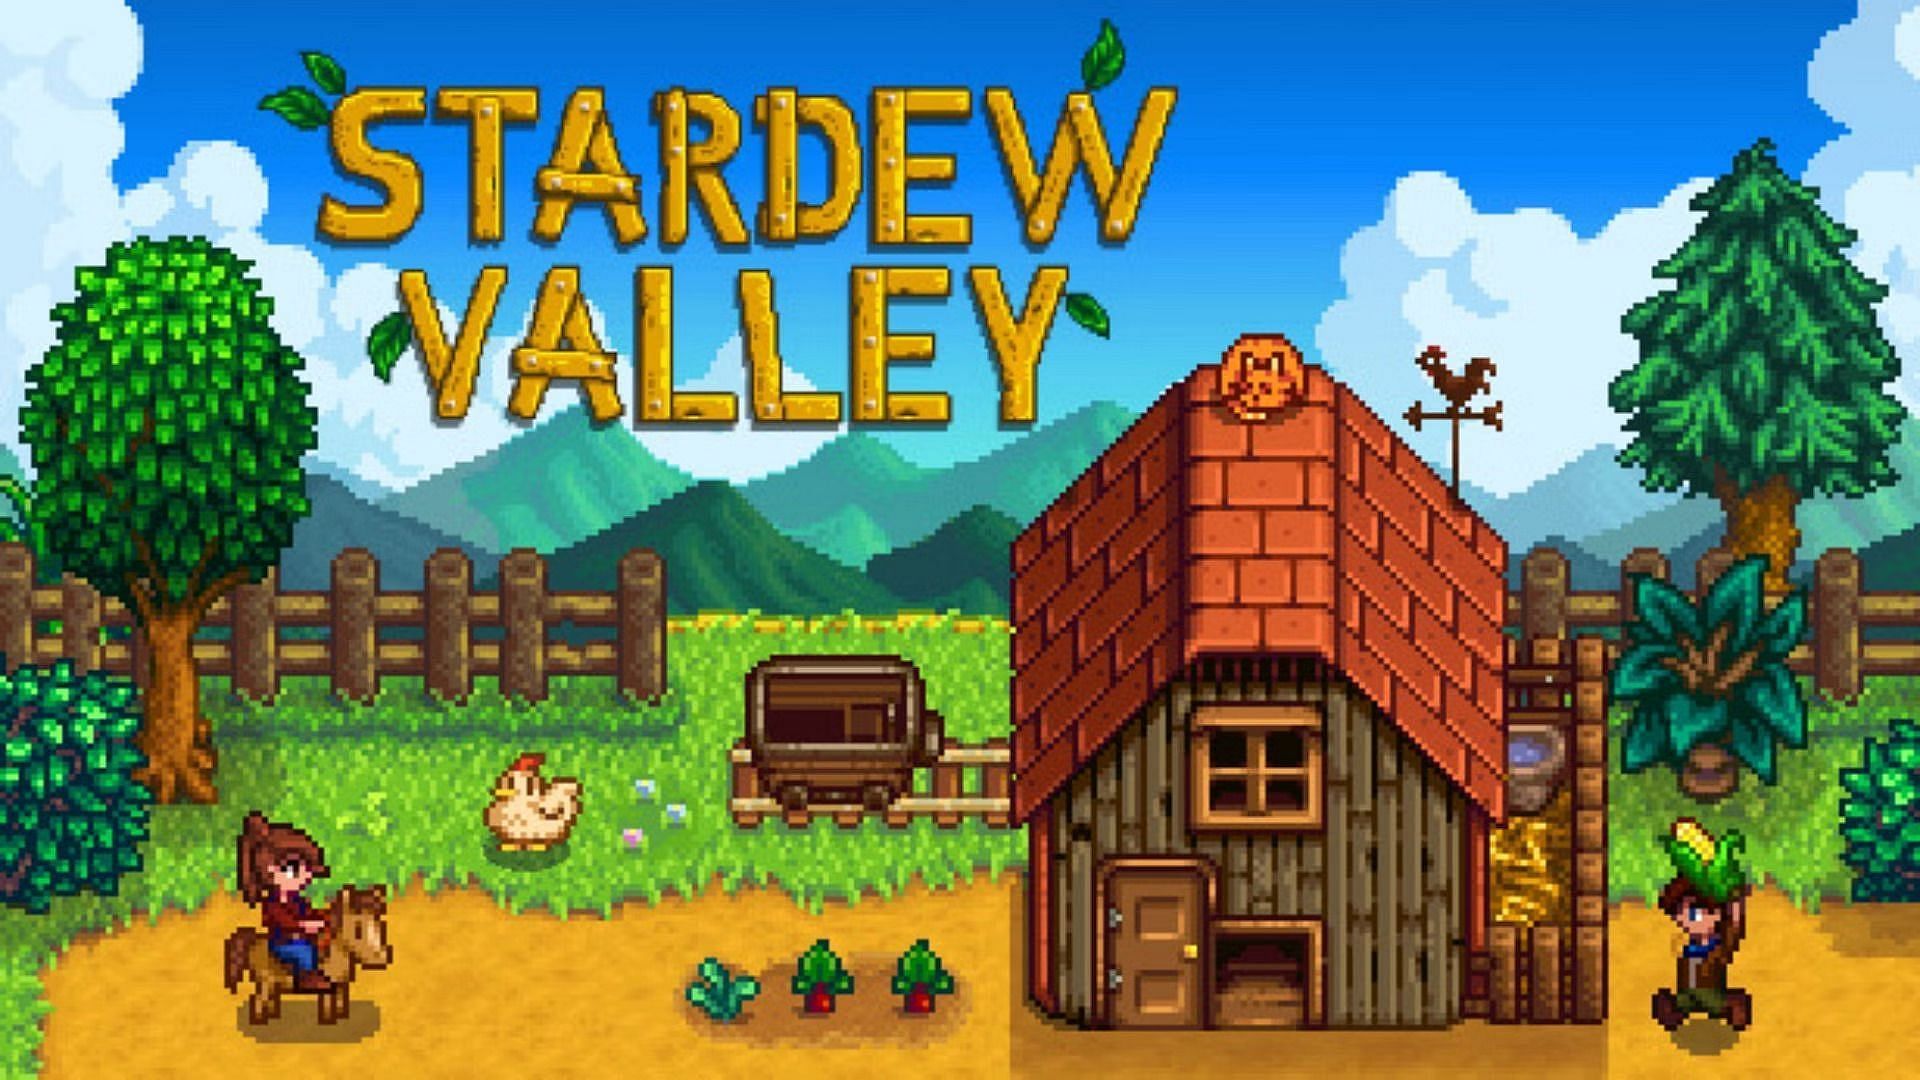 Stardew Valley is an indie game available on multiple platforms (Image via Steam/Eric Barone)